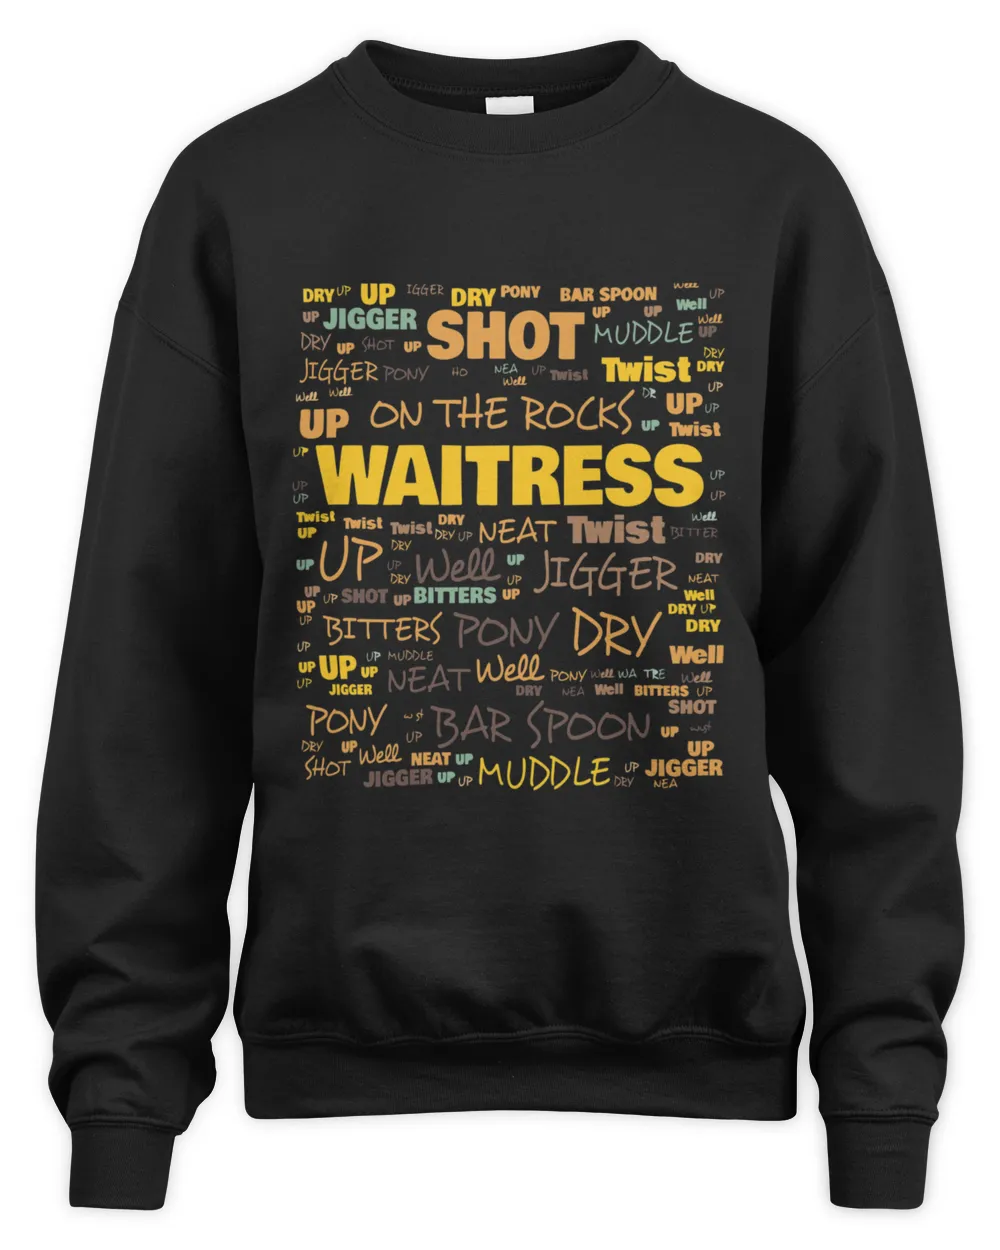 Waitress Terminology  Commonly Used Waitress Terms T-Shirt